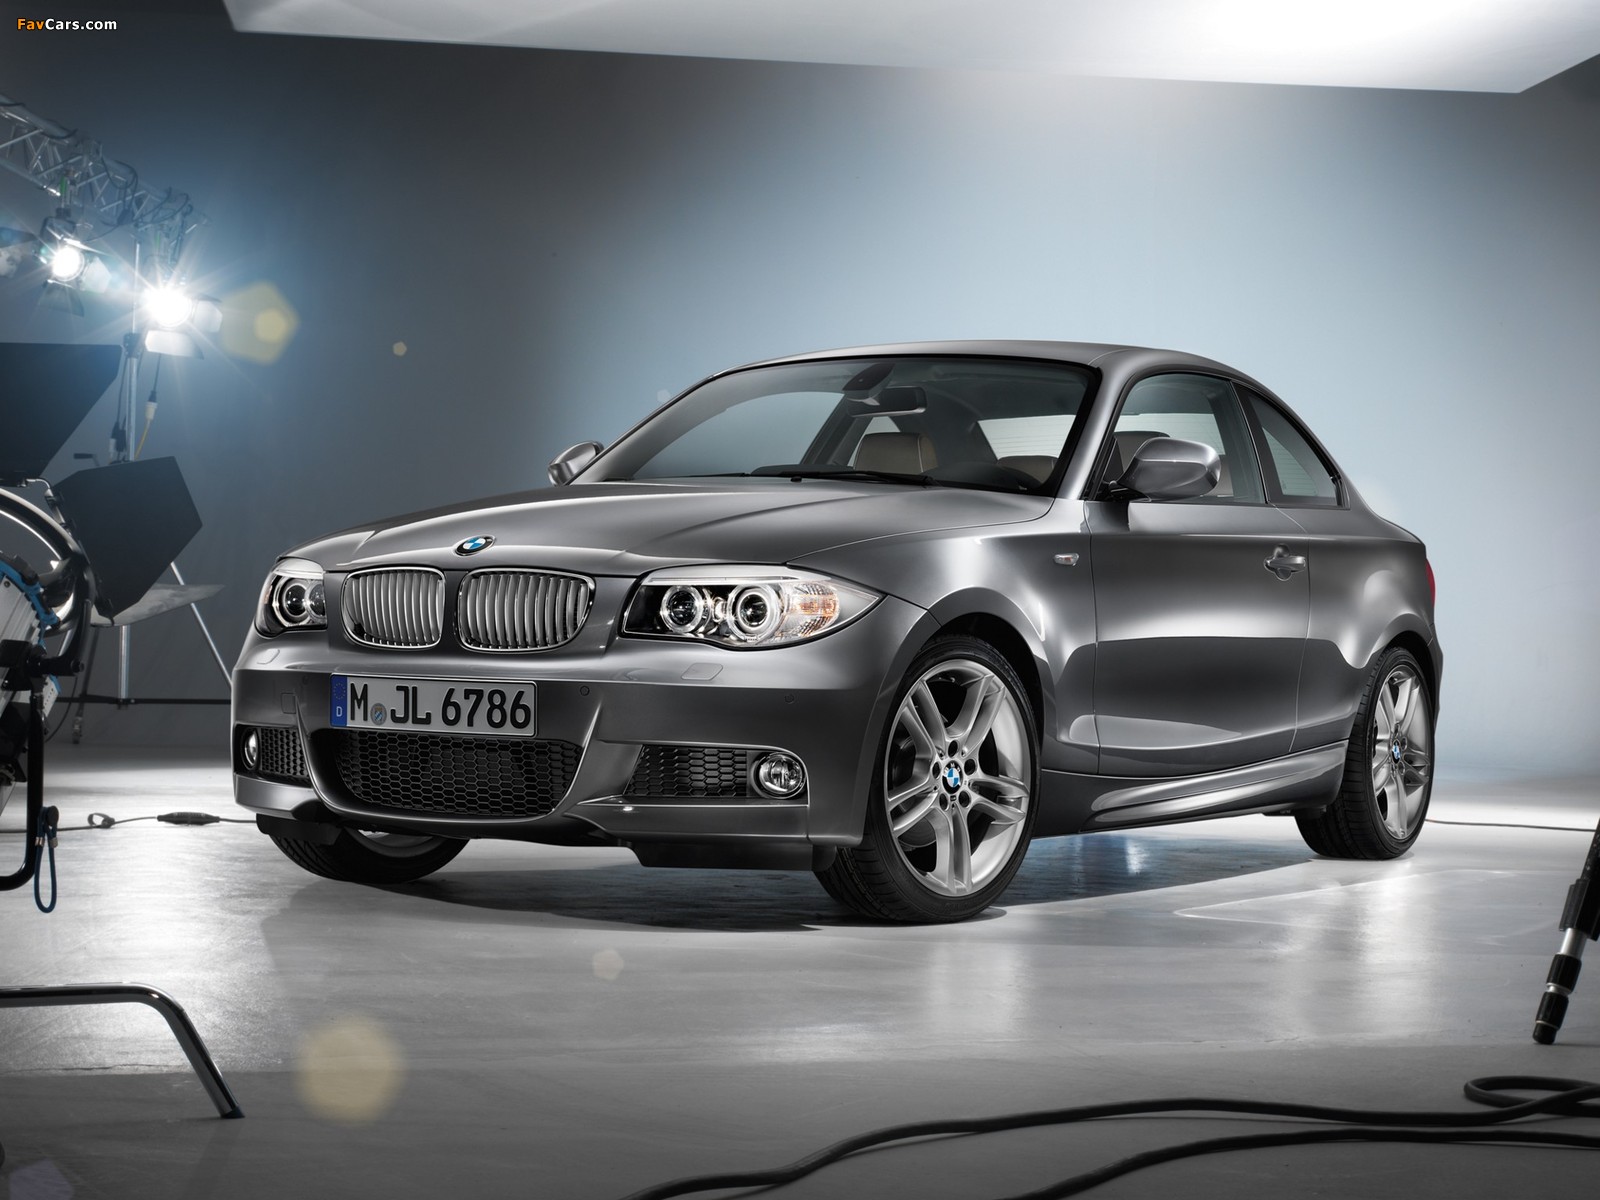 BMW 120d Coupe Lifestyle Edition (E82) 2013 wallpapers (1600 x 1200)